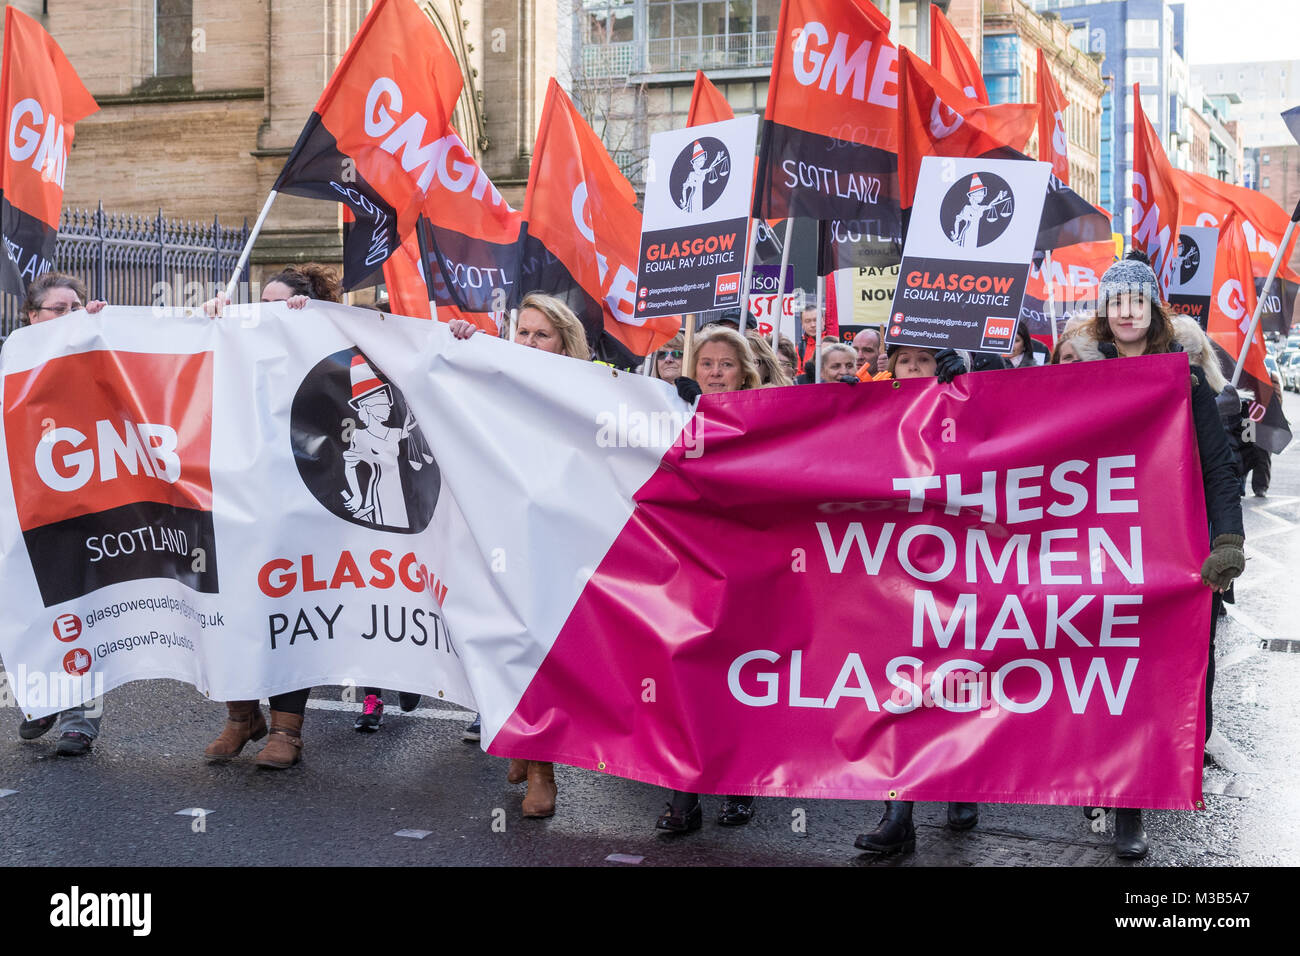 Glasgow, Scotland, UK - 10 February 2018: Women (and men) demonstrating at an equal pay protest in  Glasgow, led by women dressed as suffragettes Credit: Kay Roxby/Alamy Live News Stock Photo